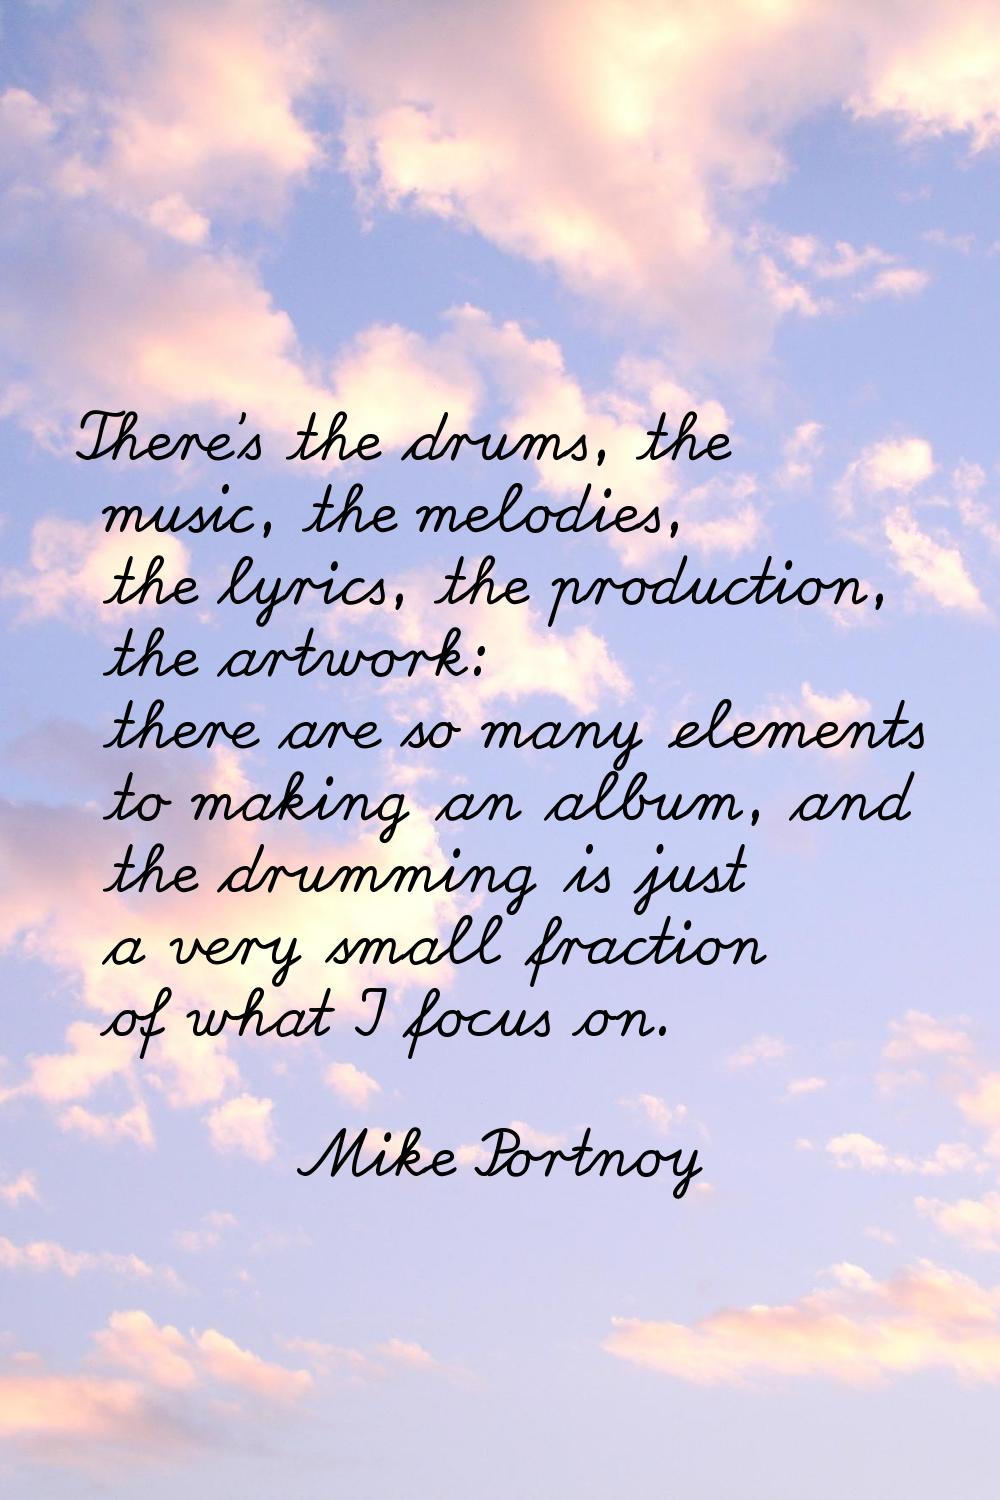 There's the drums, the music, the melodies, the lyrics, the production, the artwork: there are so m